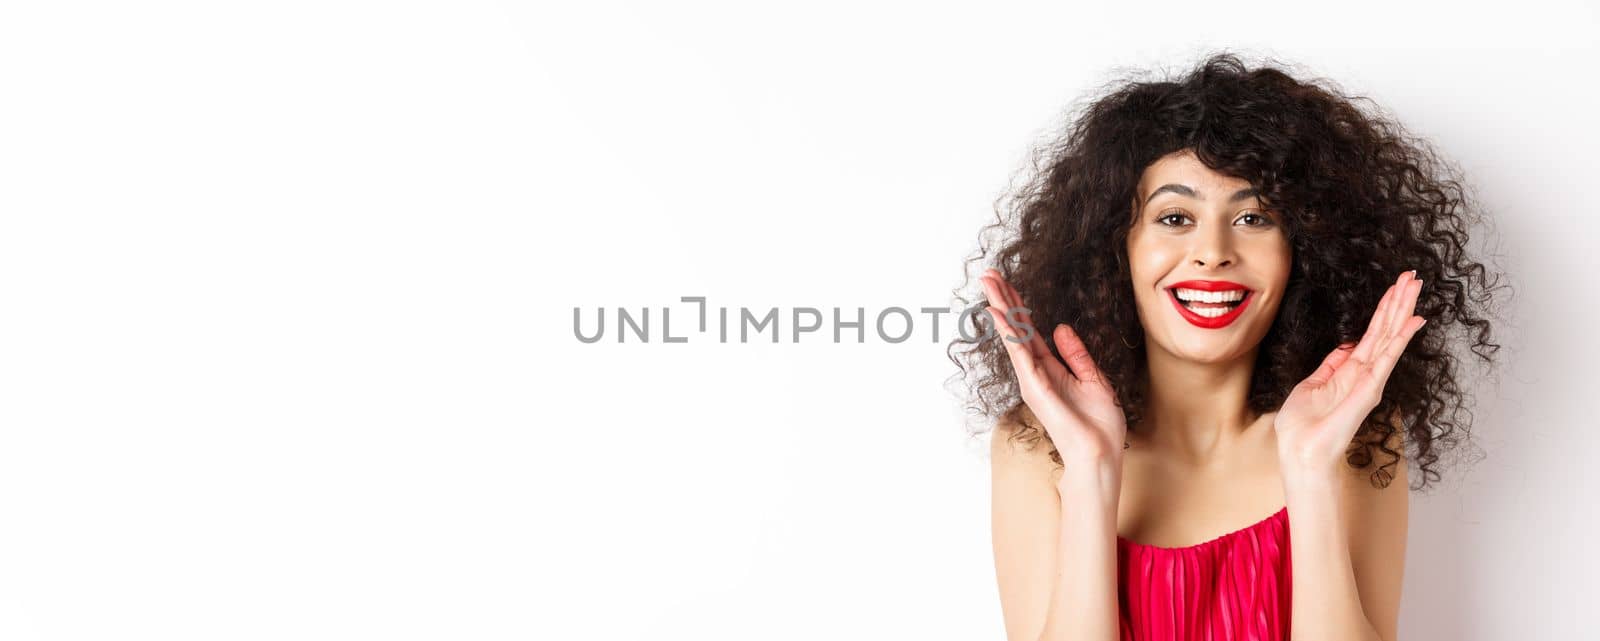 Close-up of fashionable woman with curly hair and red dress, clap hands smiling happy, applause you, standing on white background.